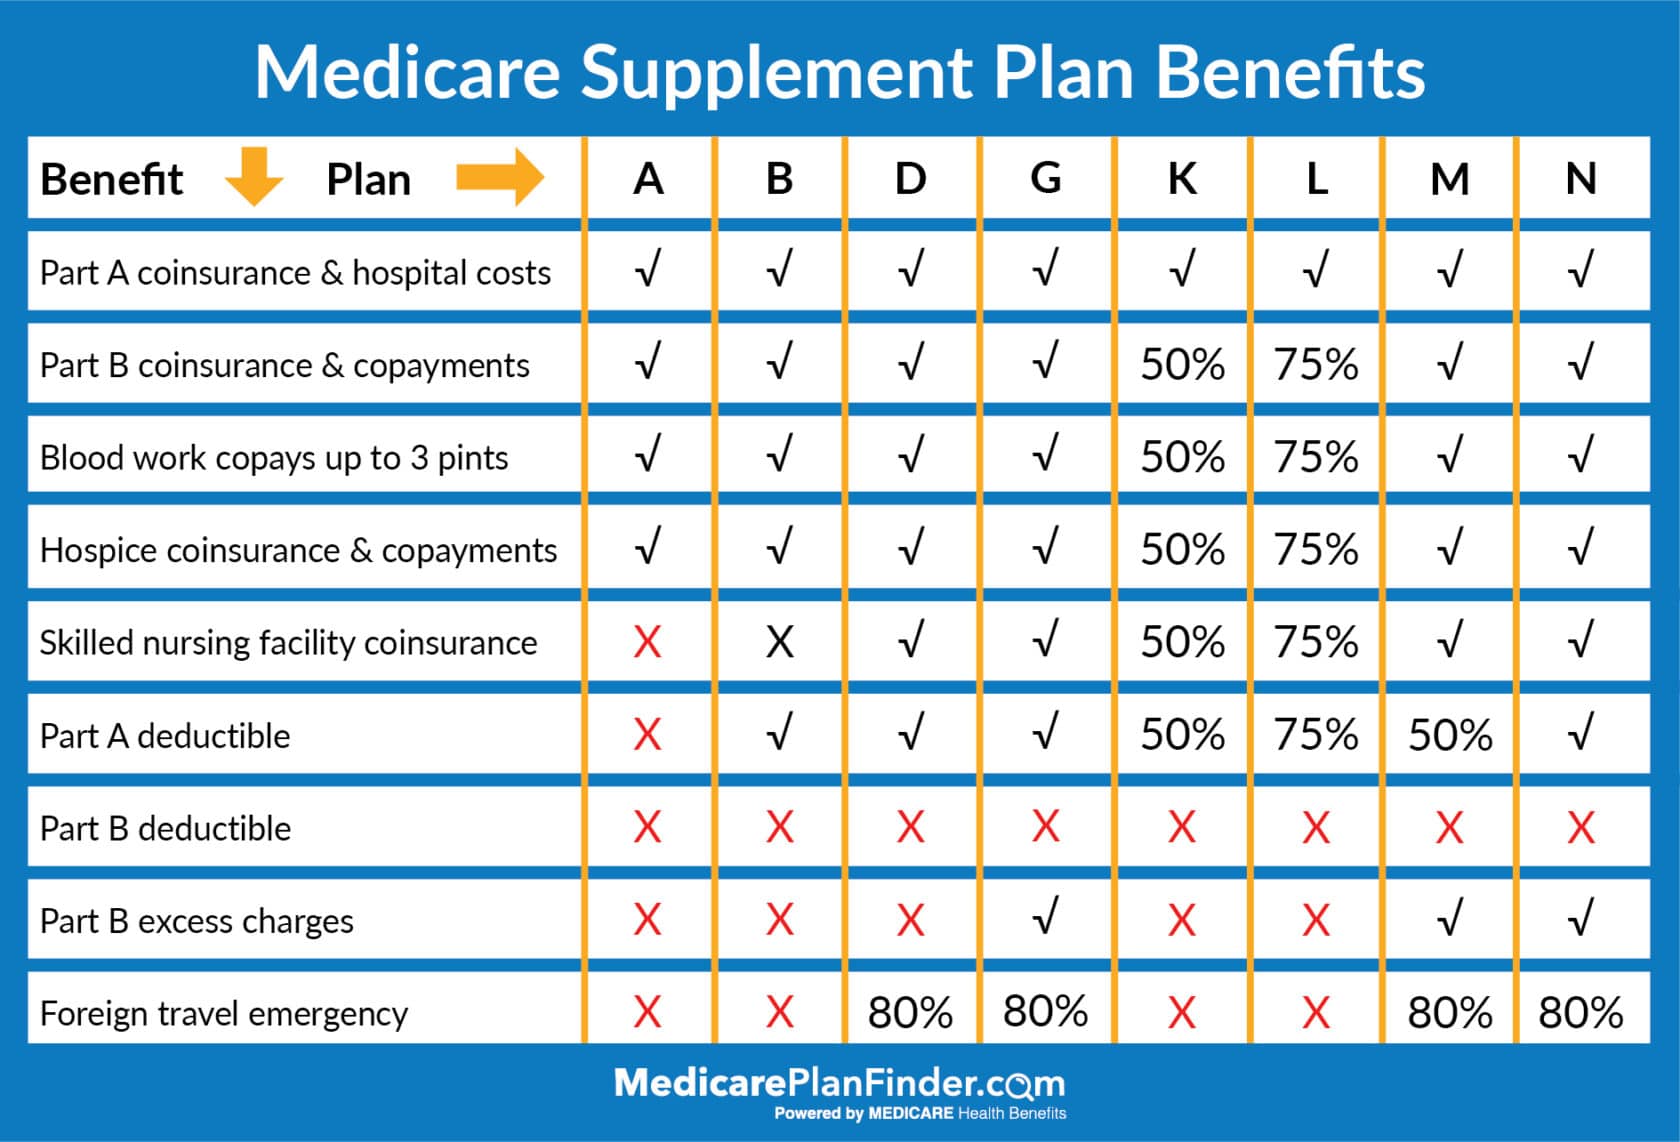 What Is The Difference Between Medigap And Medicare Advantage?